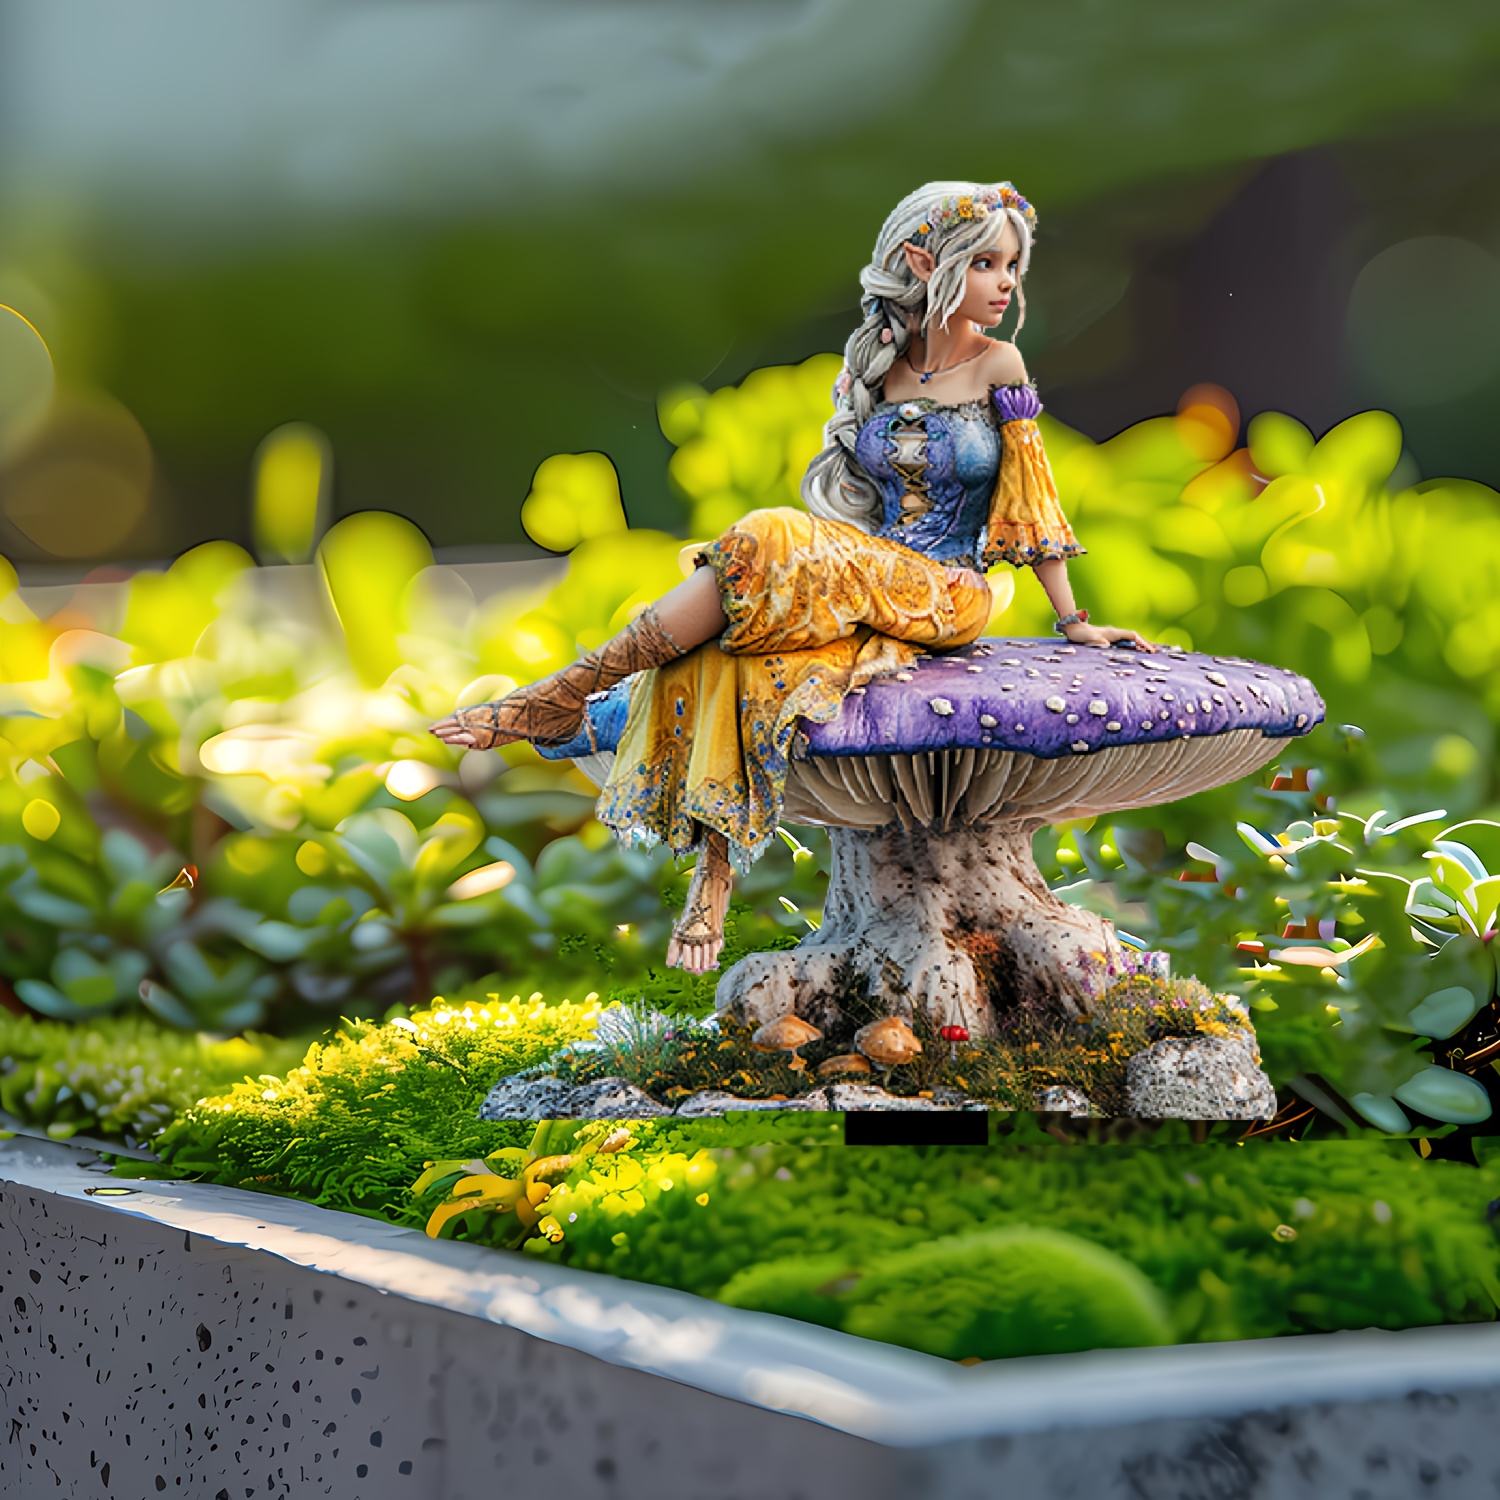 

Whimsical Fairy On Purple Mushroom Garden Stake - Durable Acrylic, Weather-resistant Outdoor Decor For Lawn, Backyard & Yard - Vibrant Colors, Realistic Design, Unique Country Style (8x5.5 Inches)